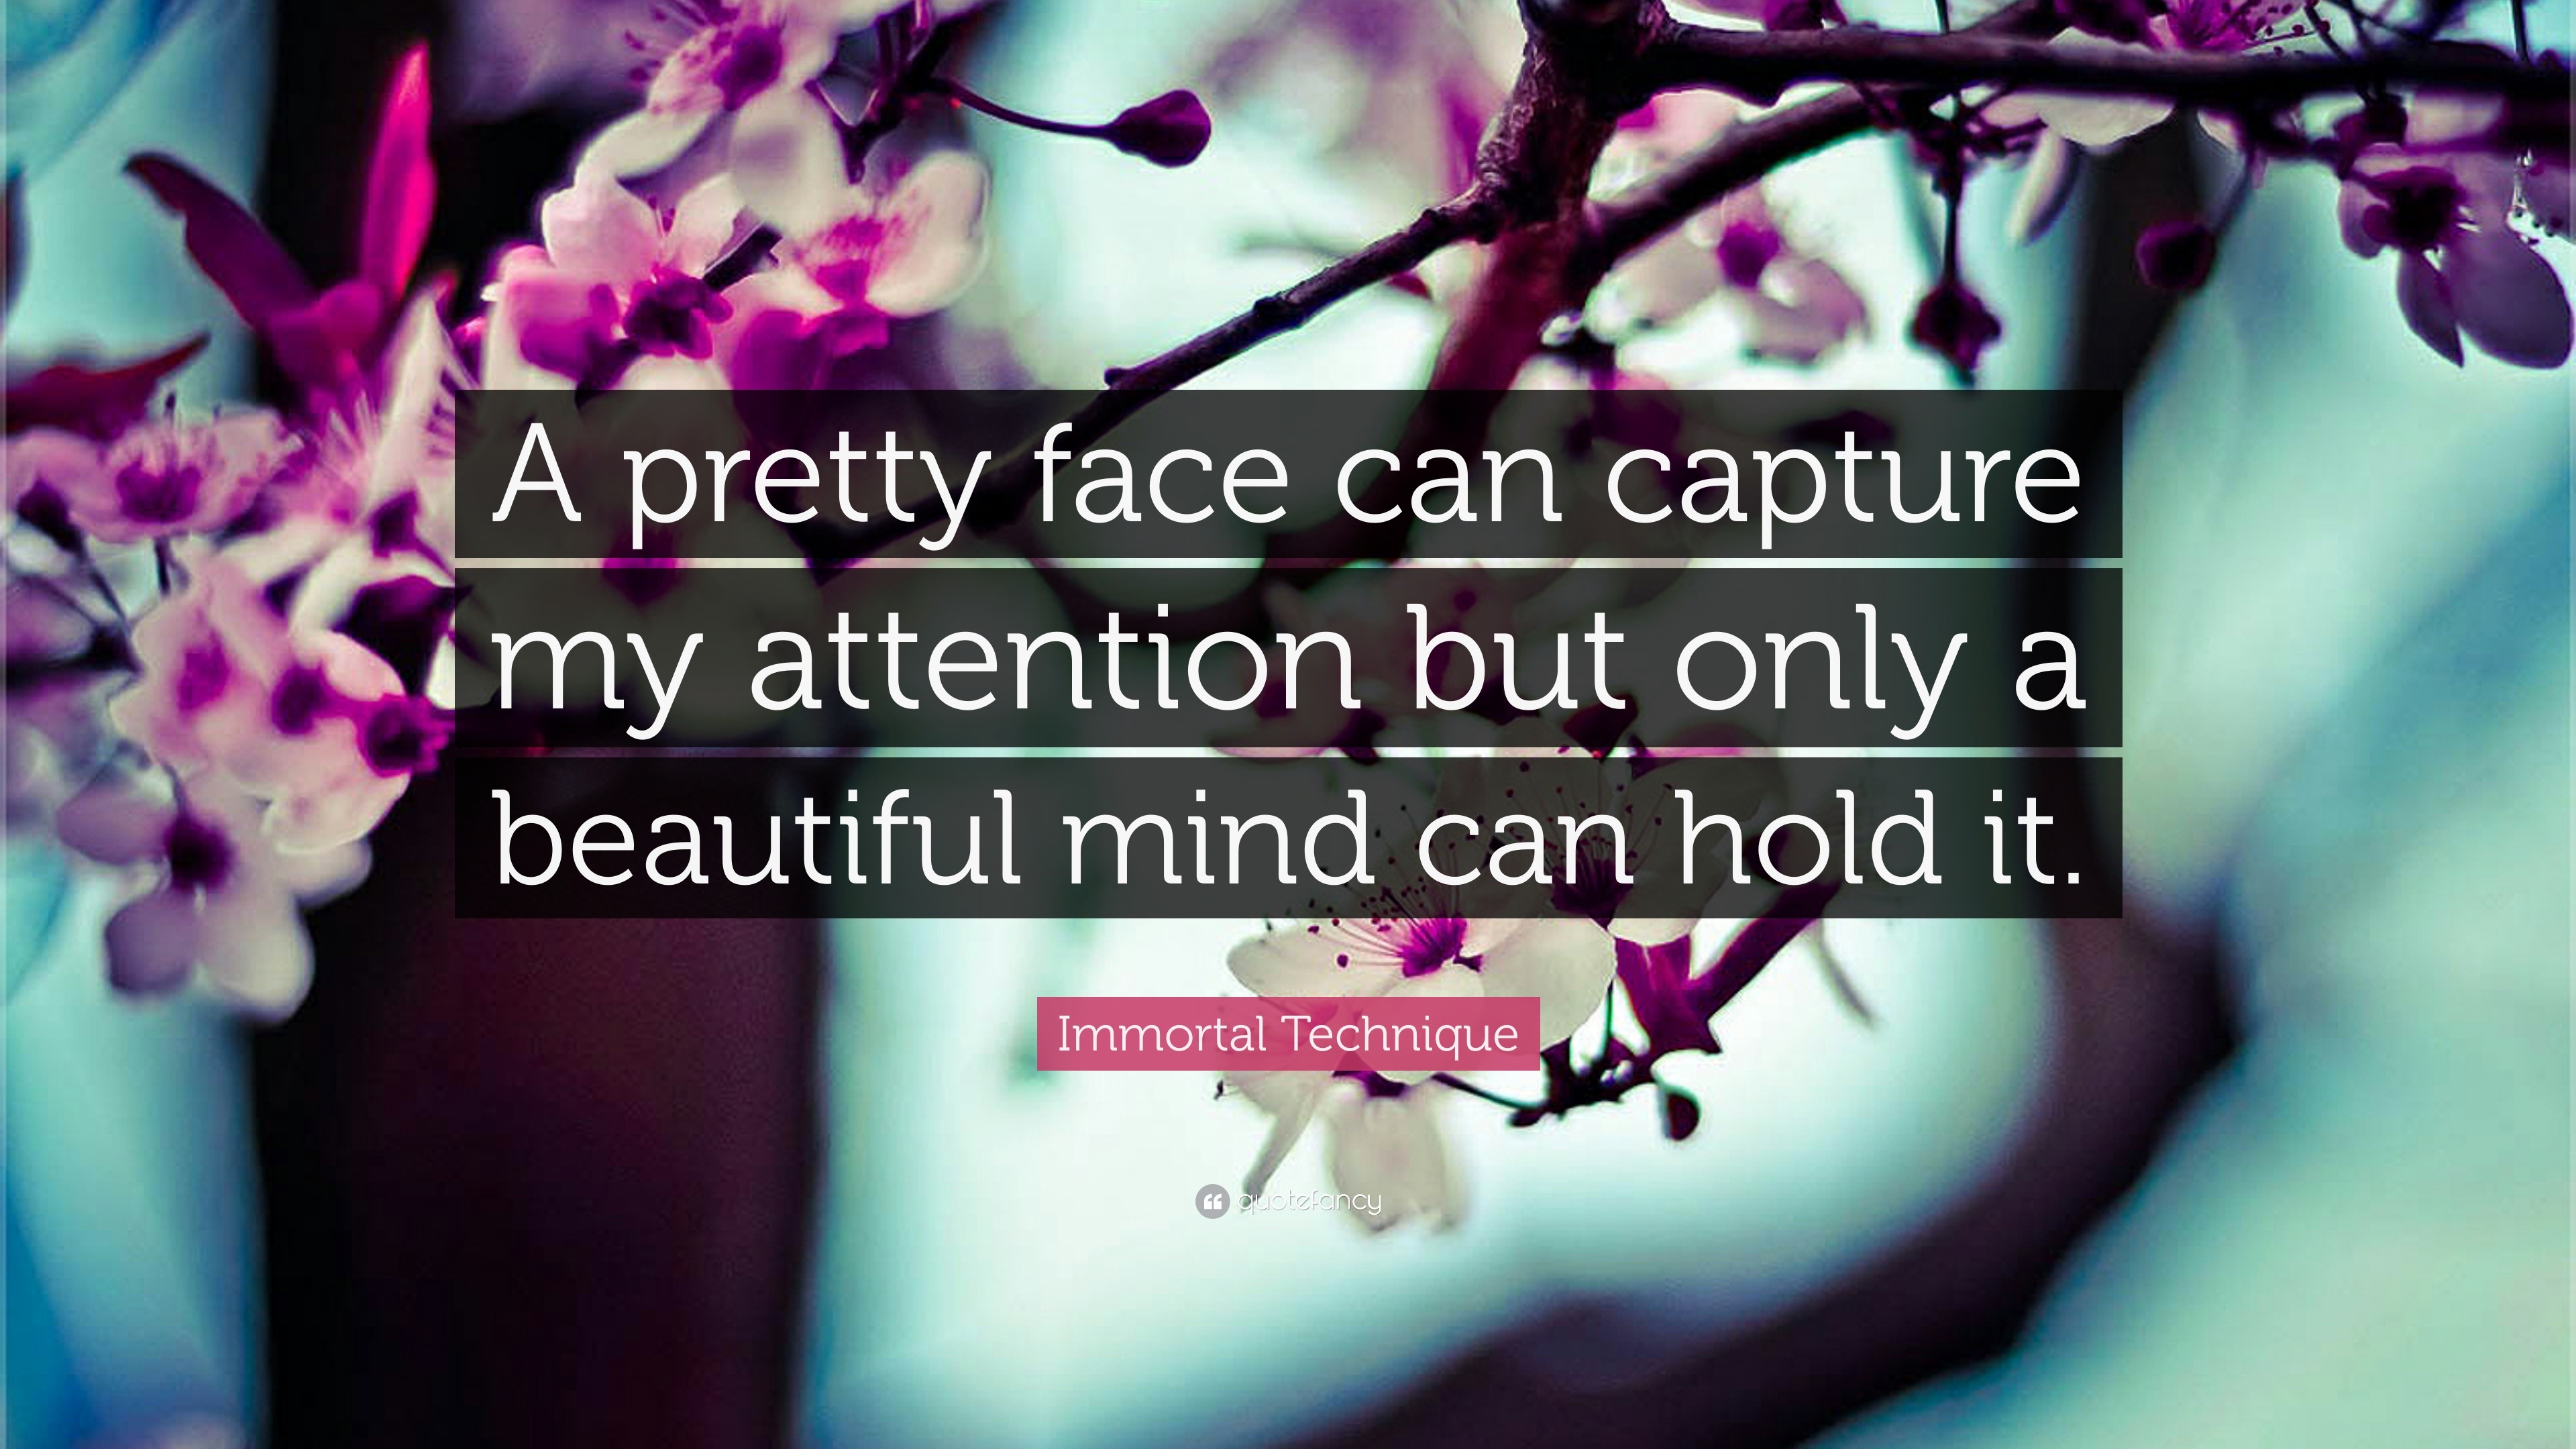 Immortal Technique Quote “A pretty face can capture my attention but only a beautiful